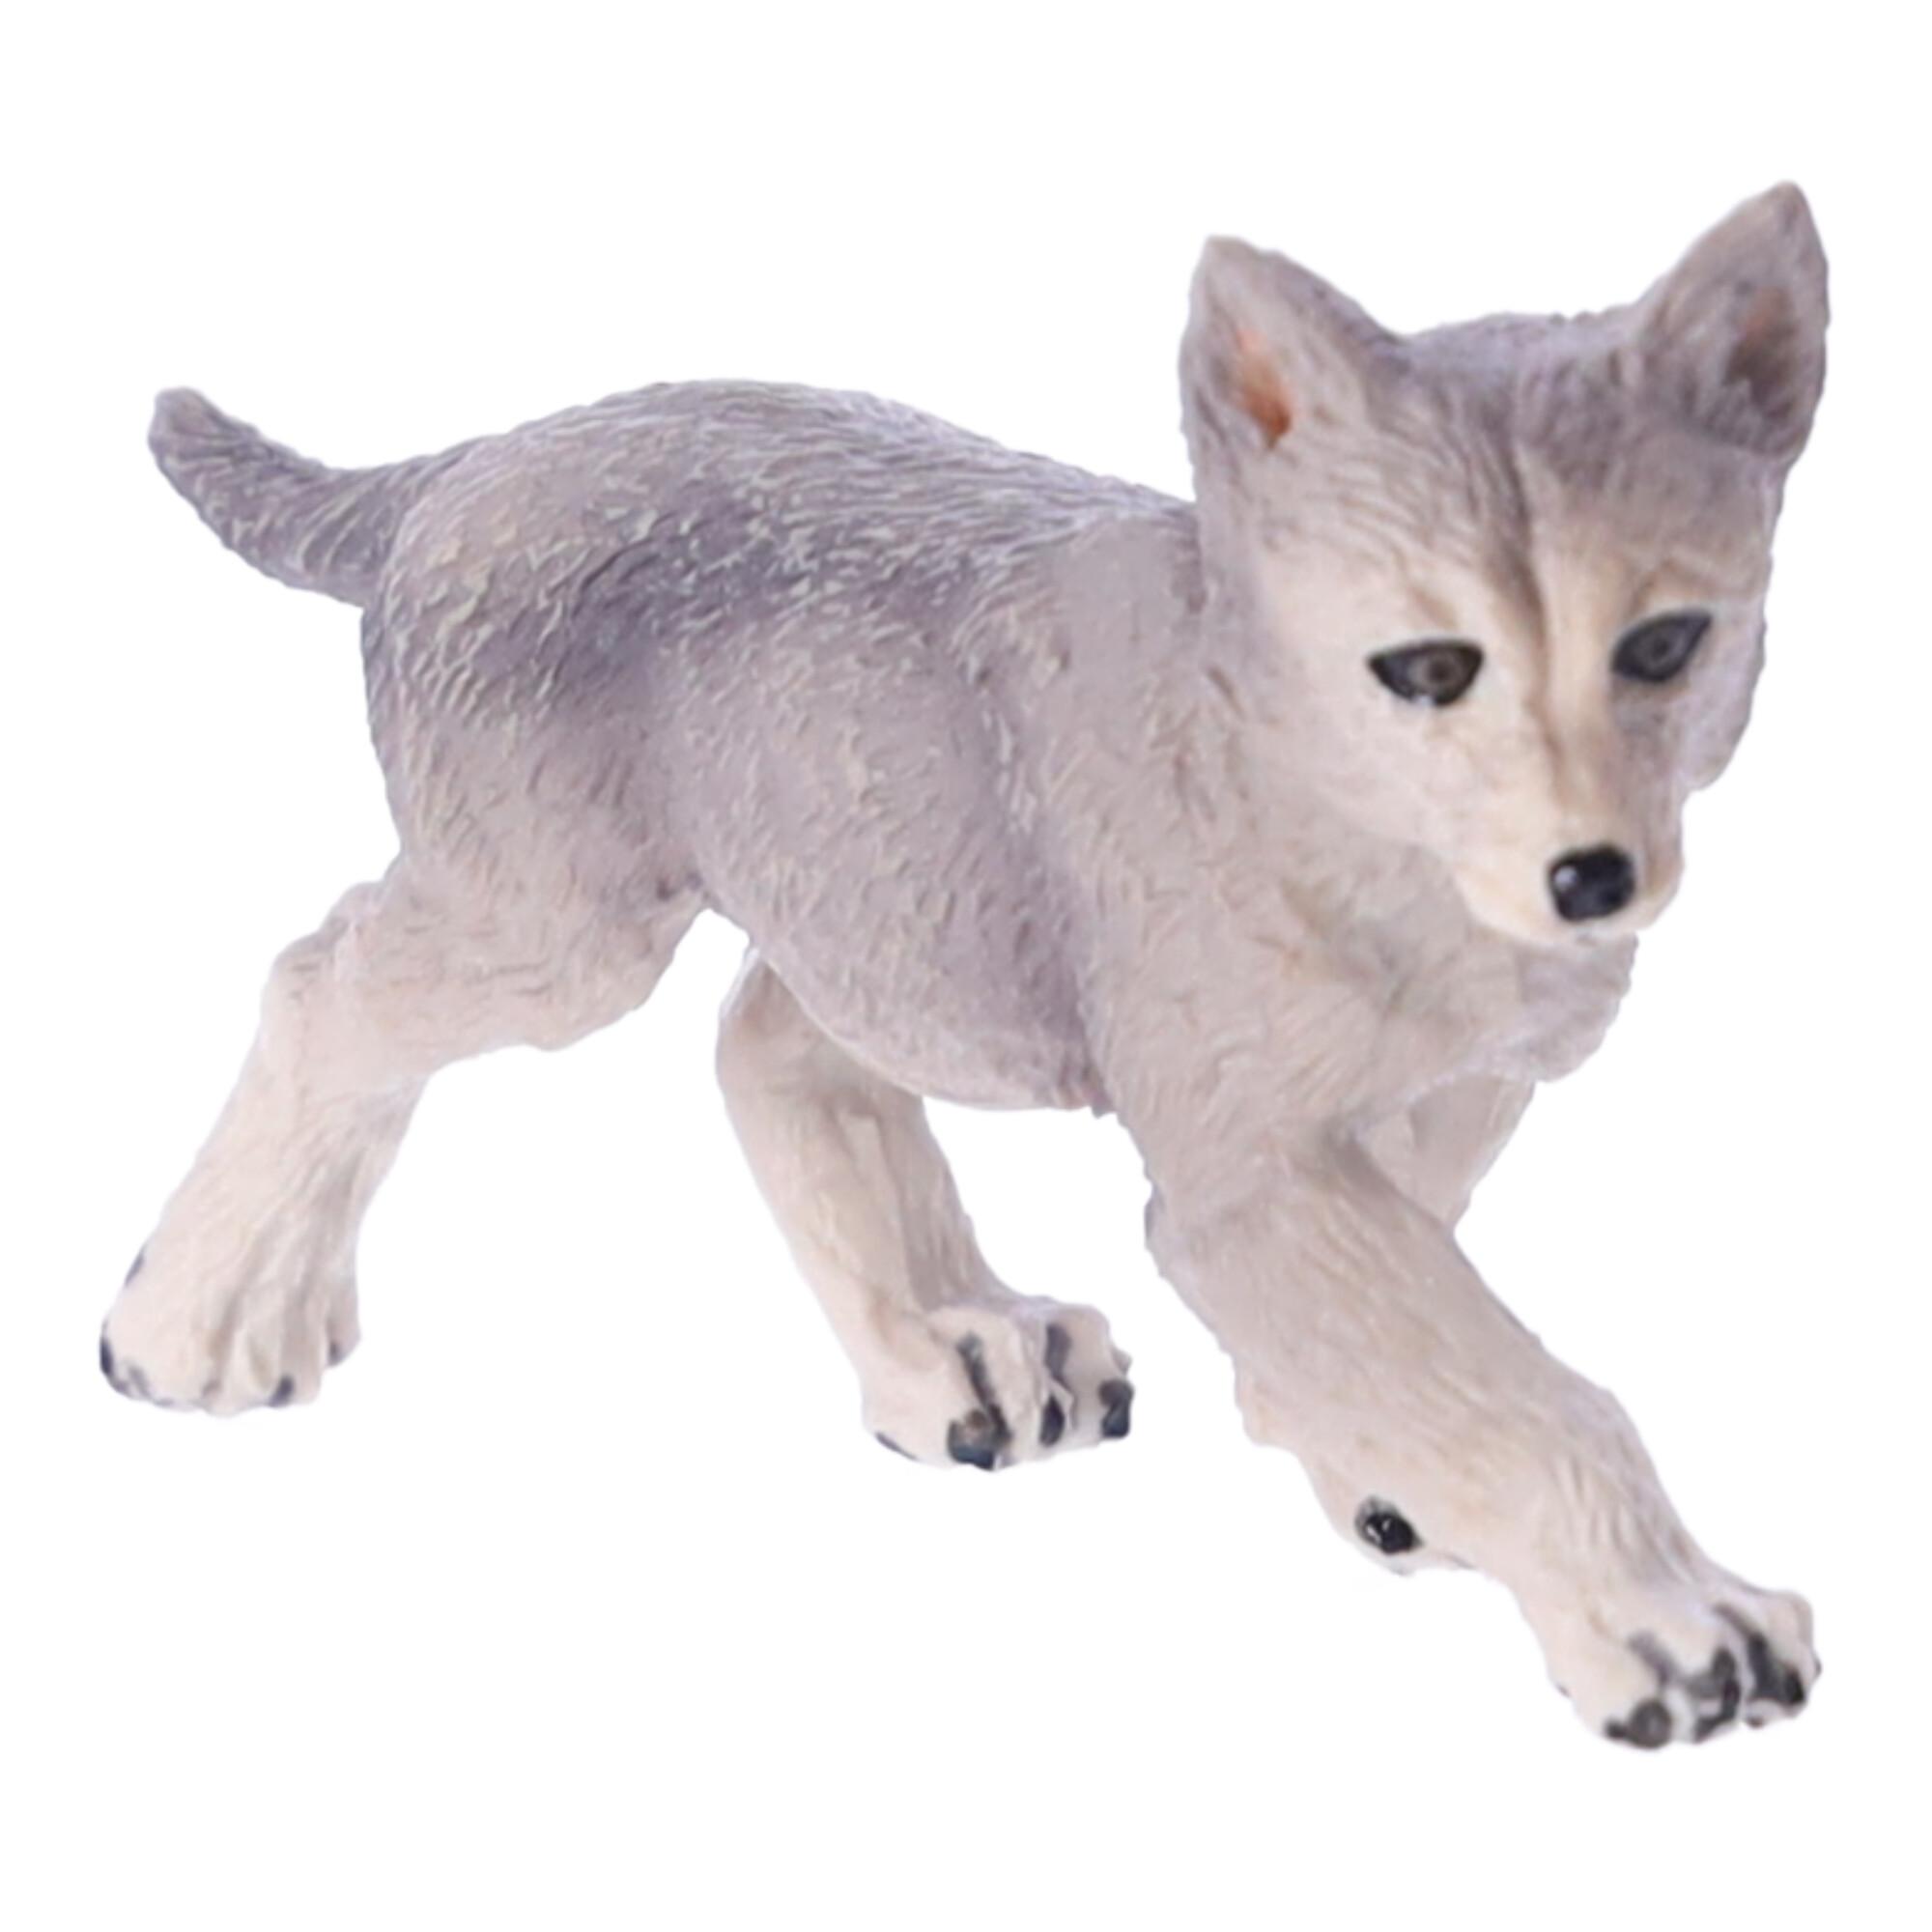 Collector's figurine Wolf cub, Papo